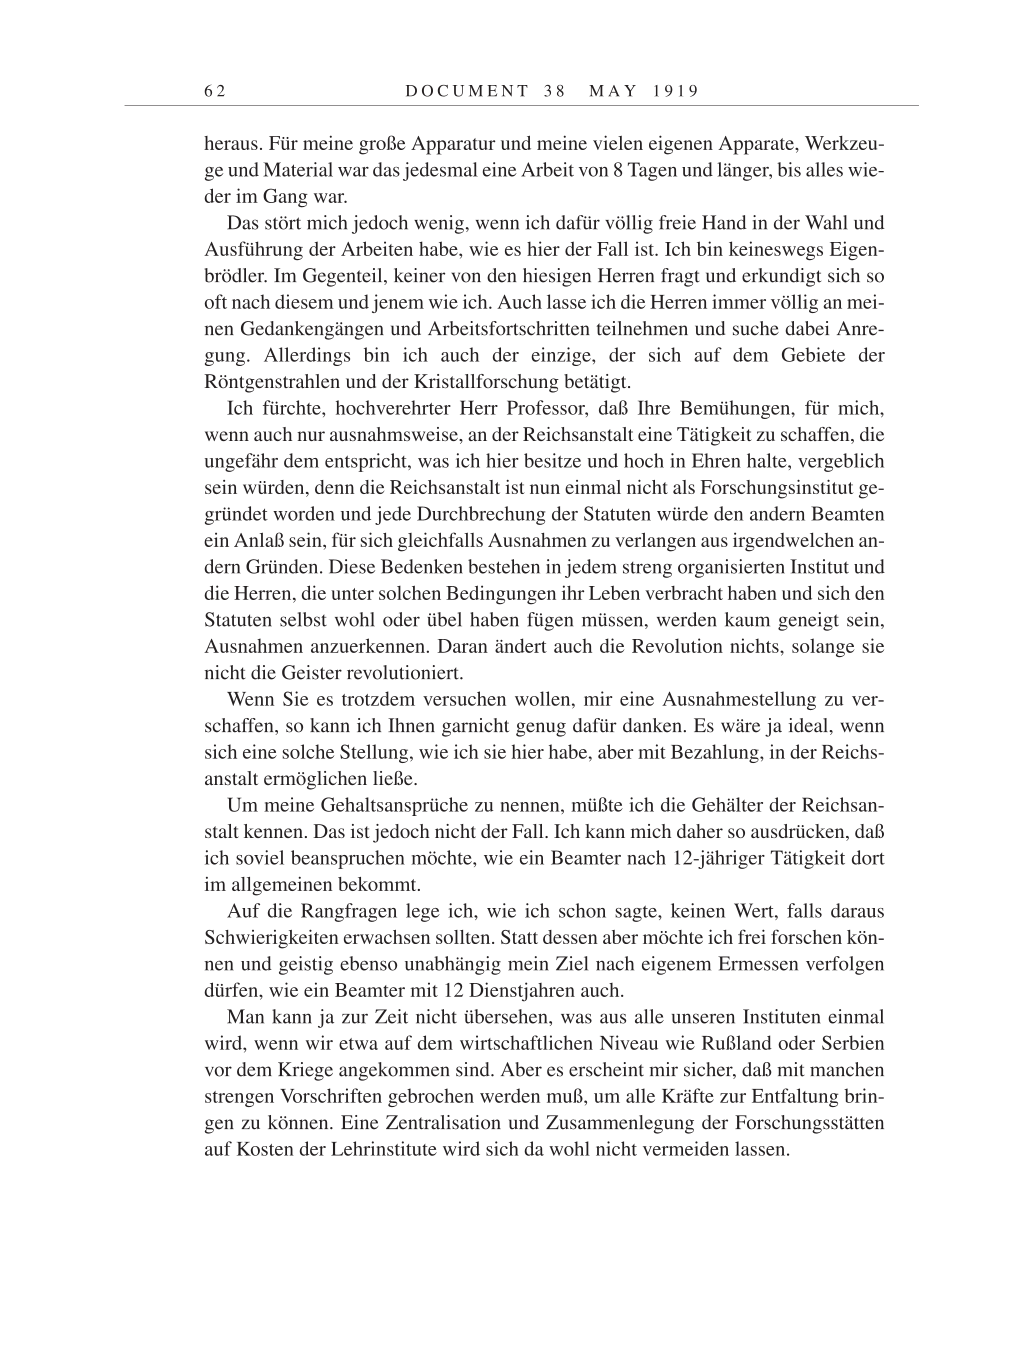 Volume 9: The Berlin Years: Correspondence January 1919-April 1920 page 62